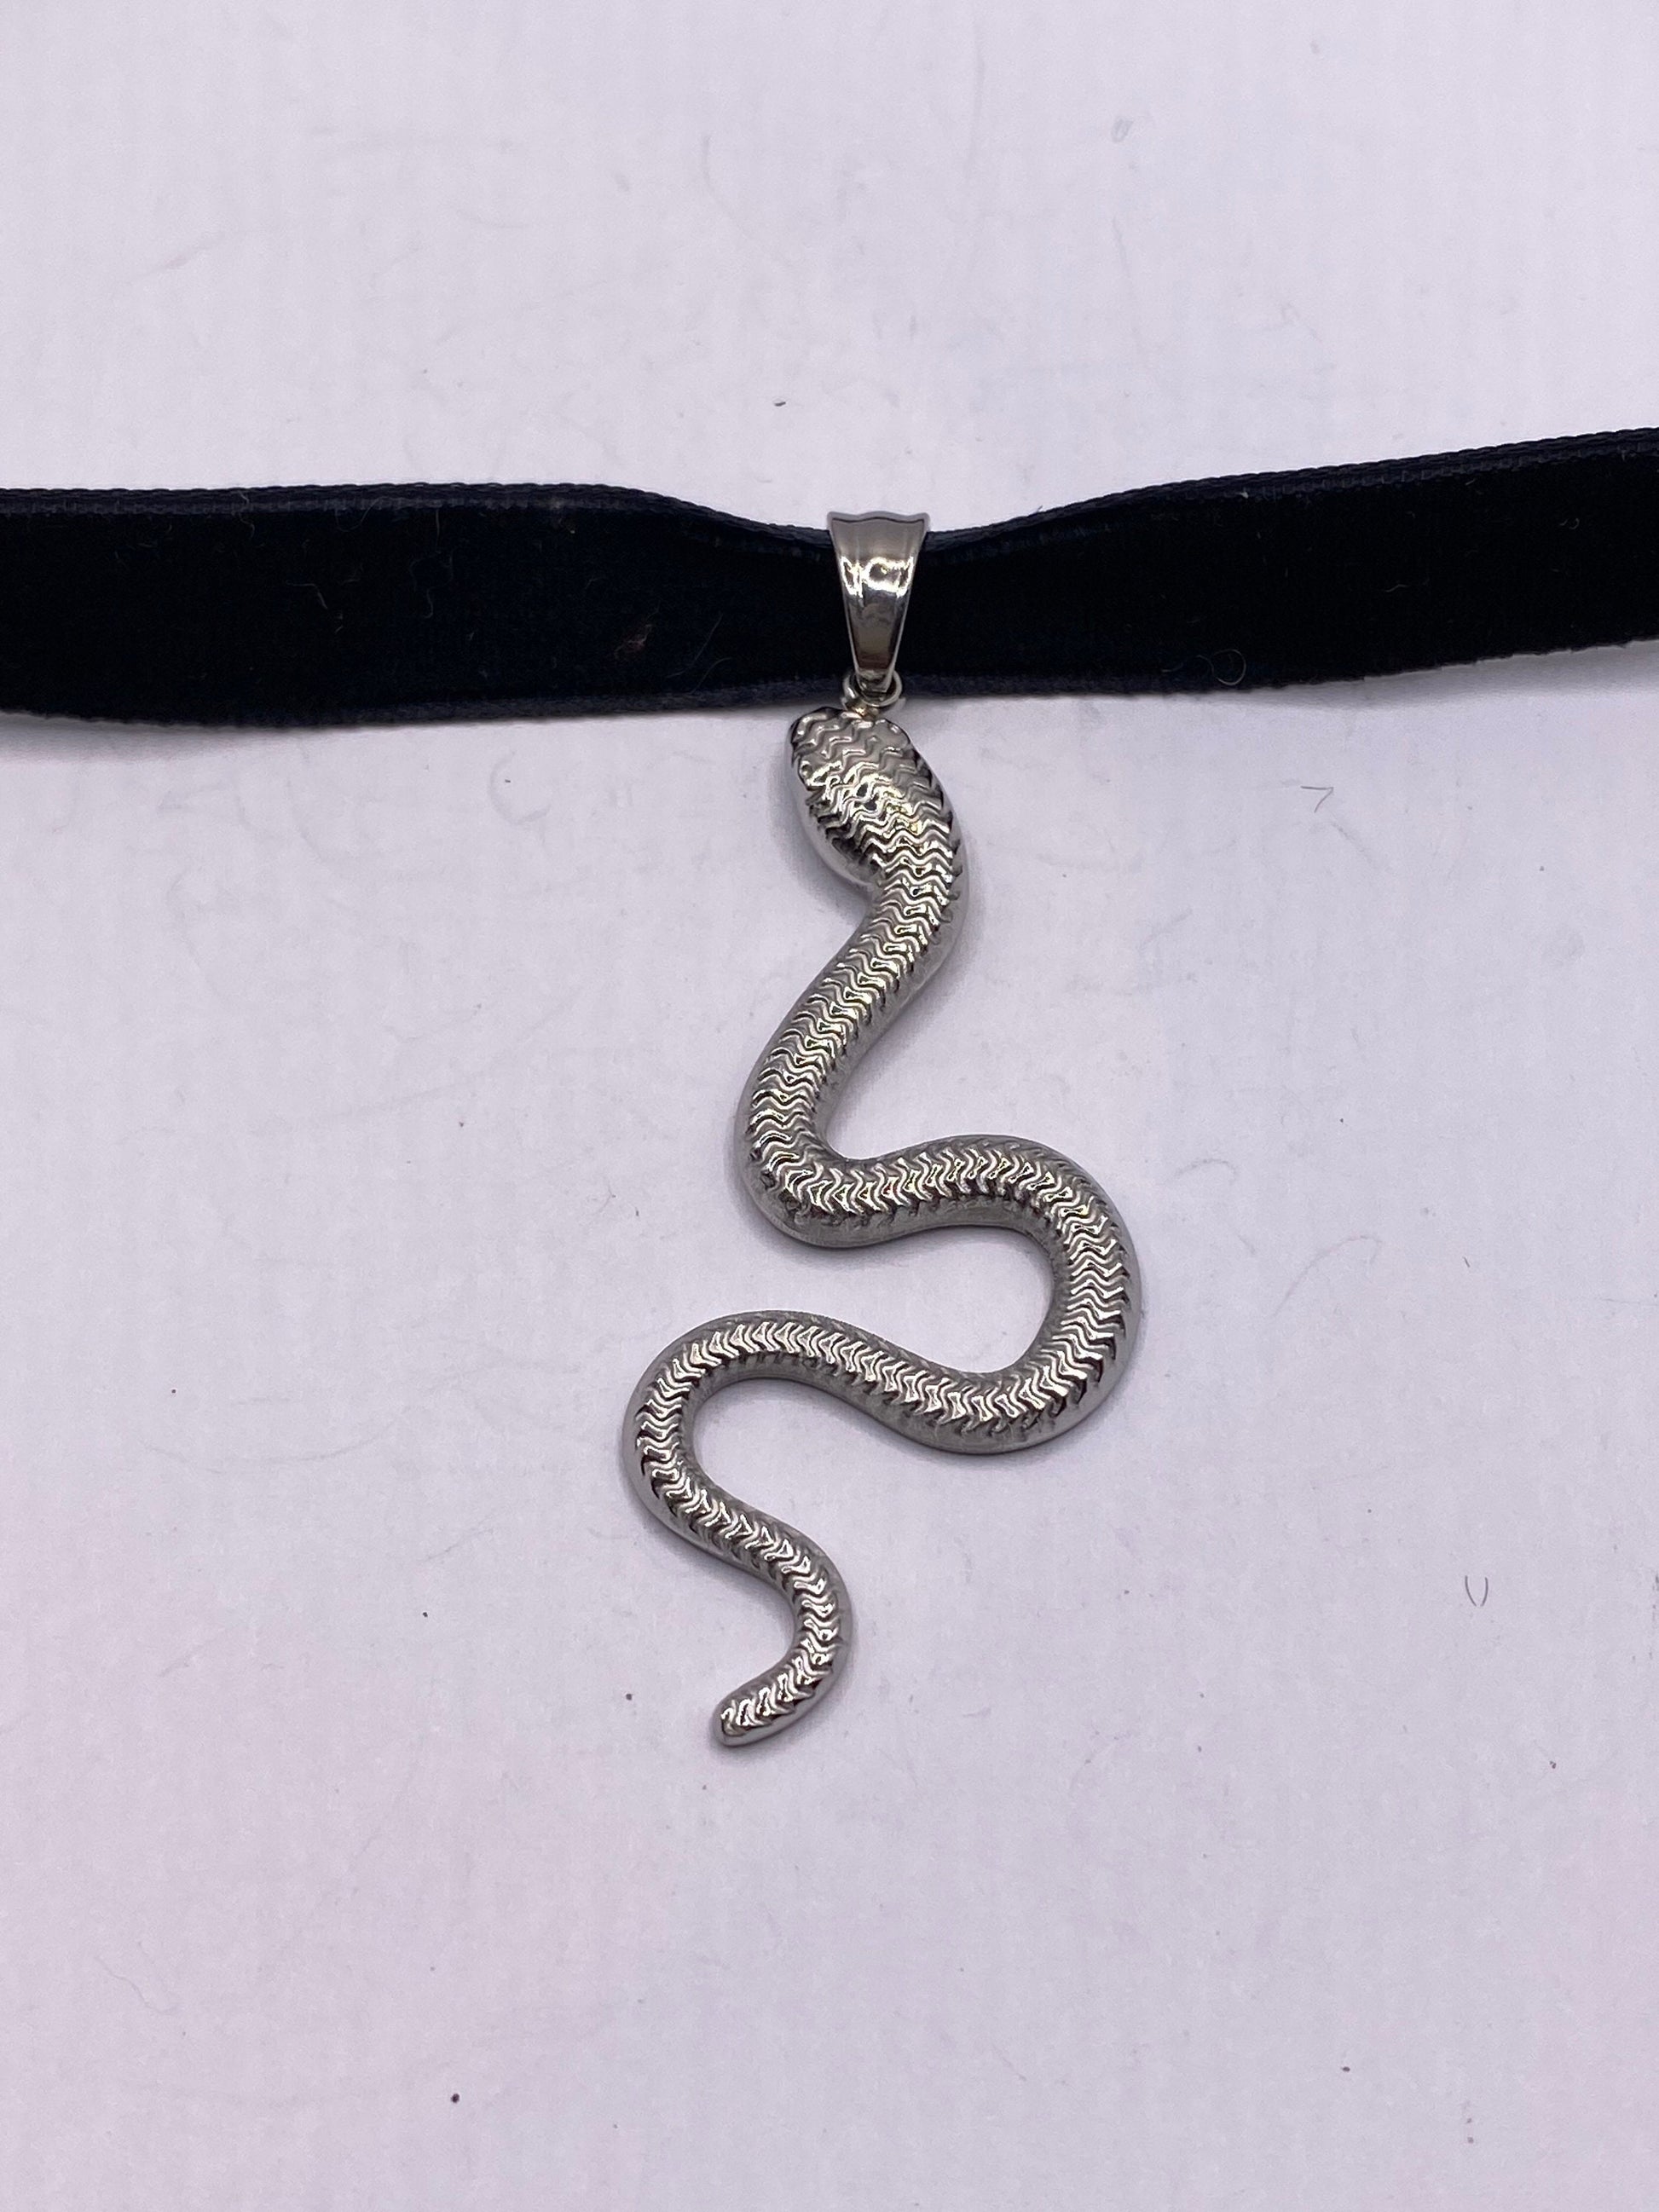 Vintage Stainless Steel Snake Choker Necklace